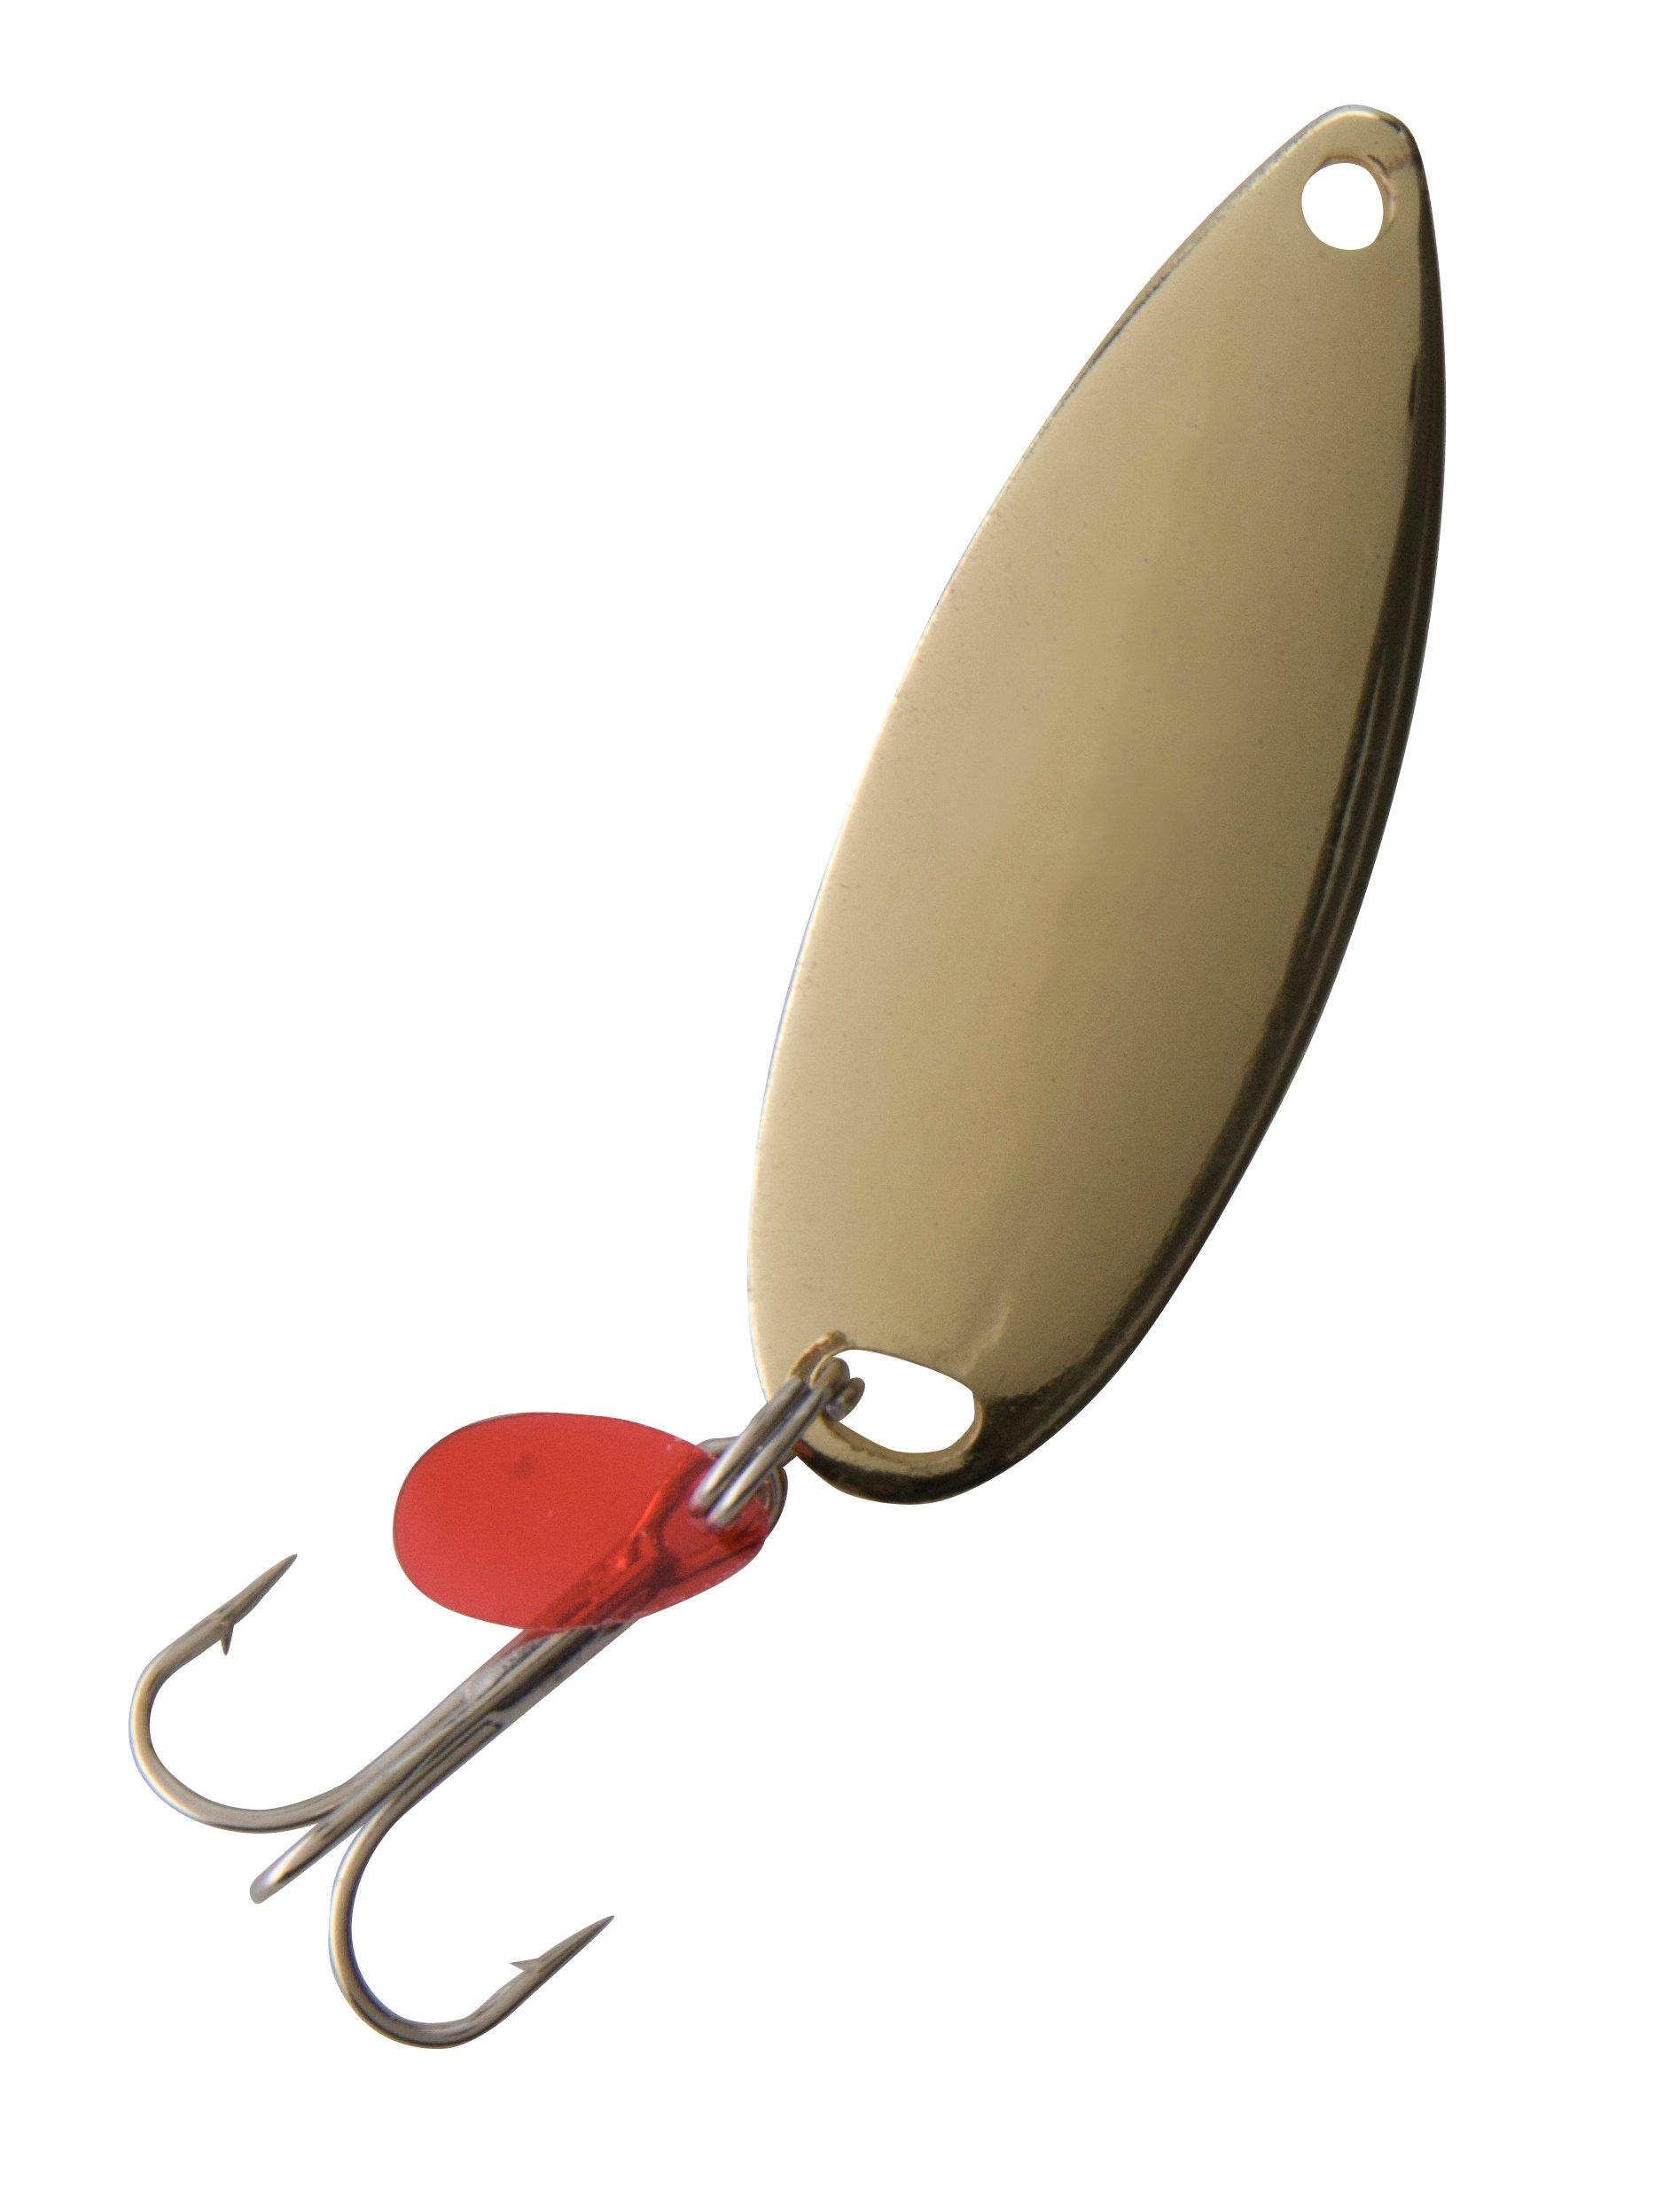 Johnson Sprite Lure  Up to 31% Off Free Shipping over $49!